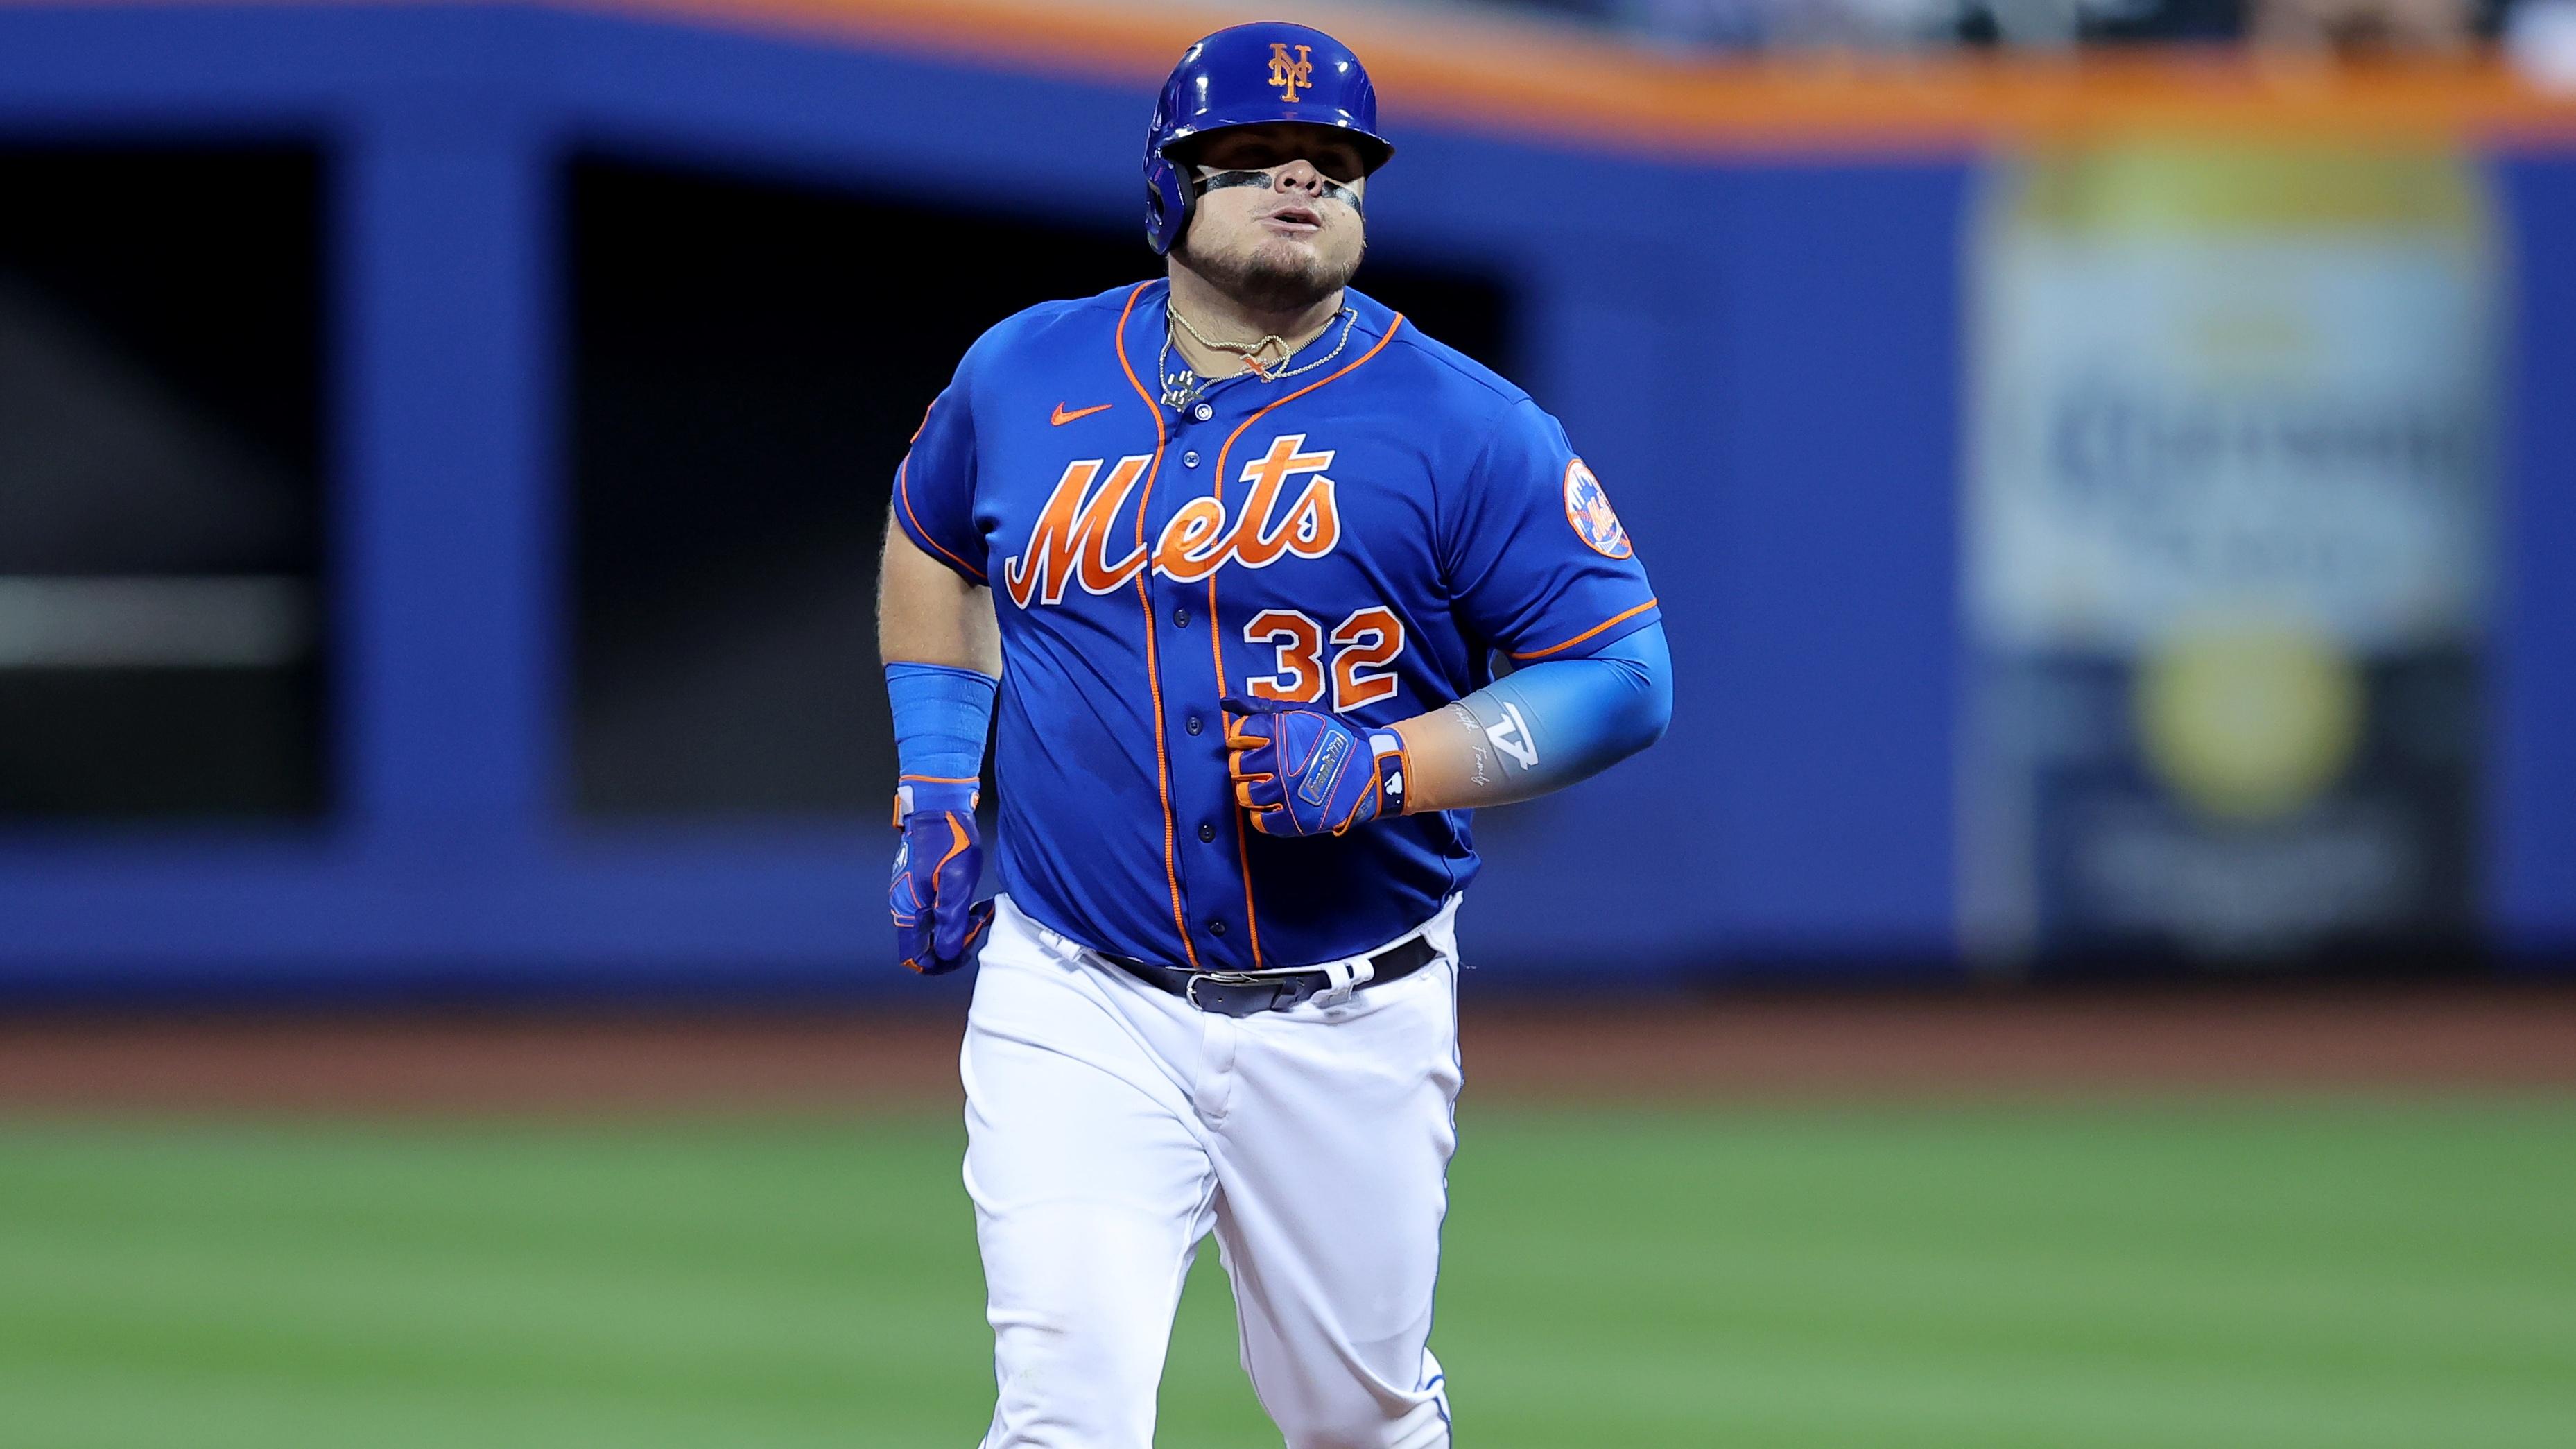 New York Mets designated hitter Daniel Vogelbach (32) rounds the bases after hitting a solo home run against the Pittsburgh Pirates during the second inning at Citi Field. / Brad Penner - USA TODAY Sports